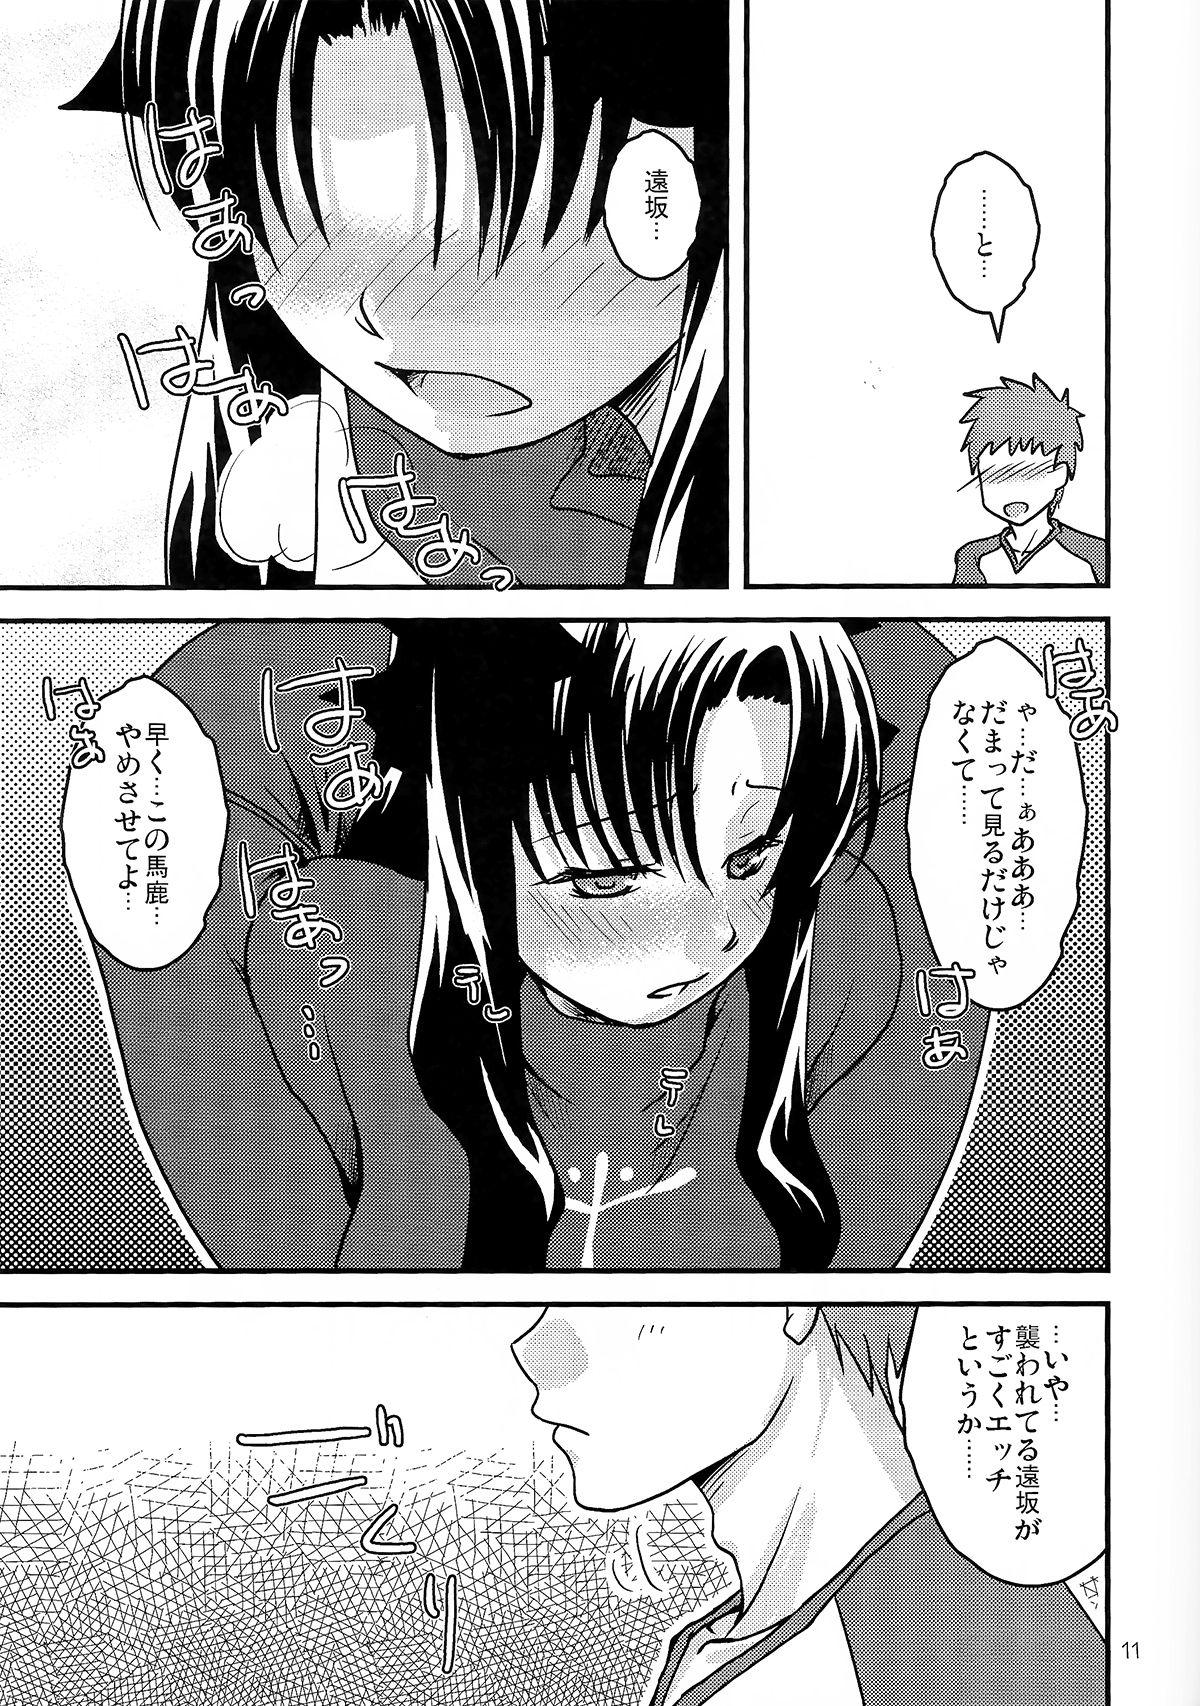 Negra Fakers - Fate stay night Lez - Page 10